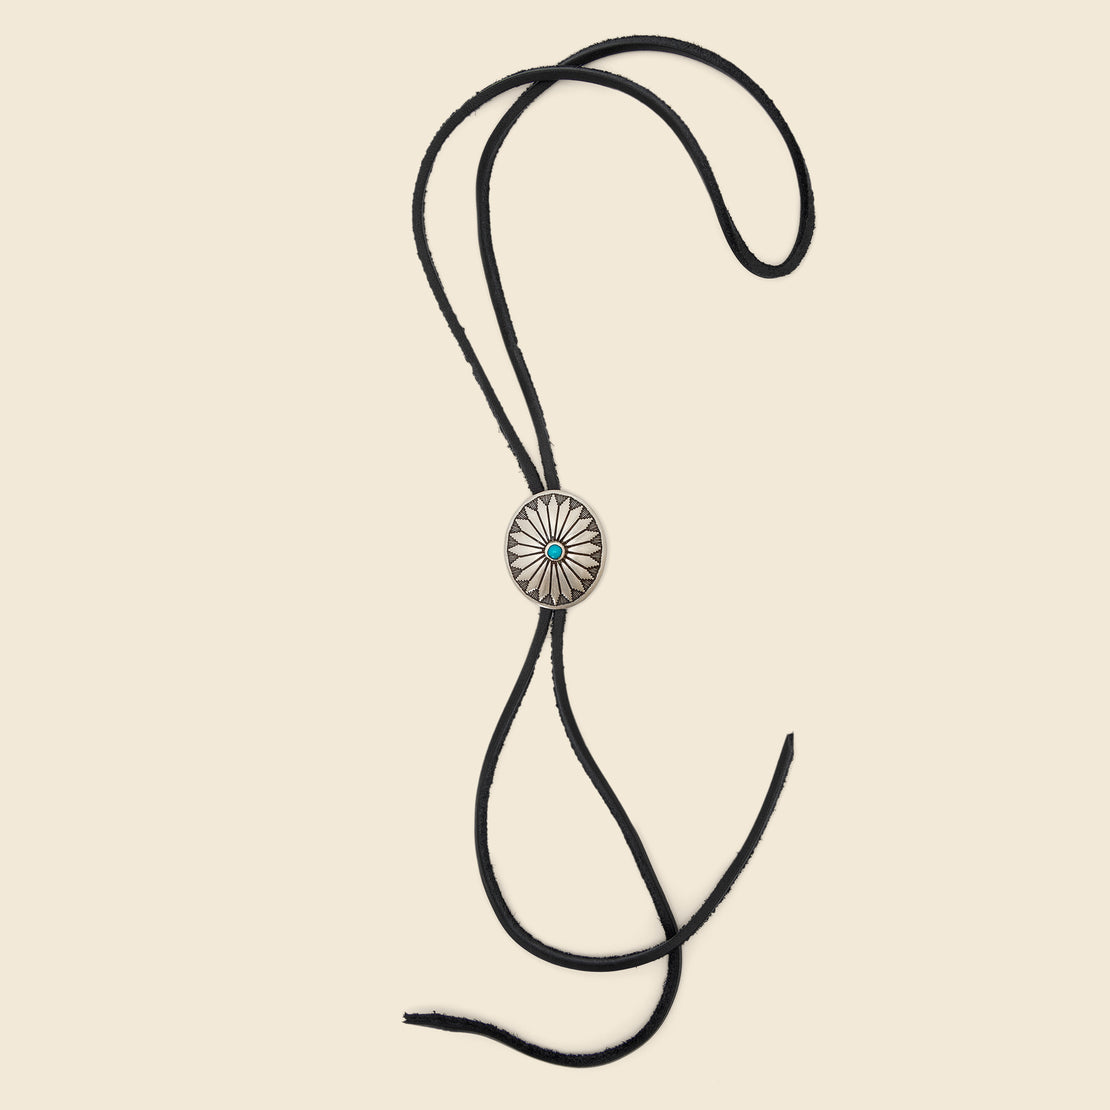 Yuketen Leather Bolo Tie with Concho - Black & Turquoise Flower